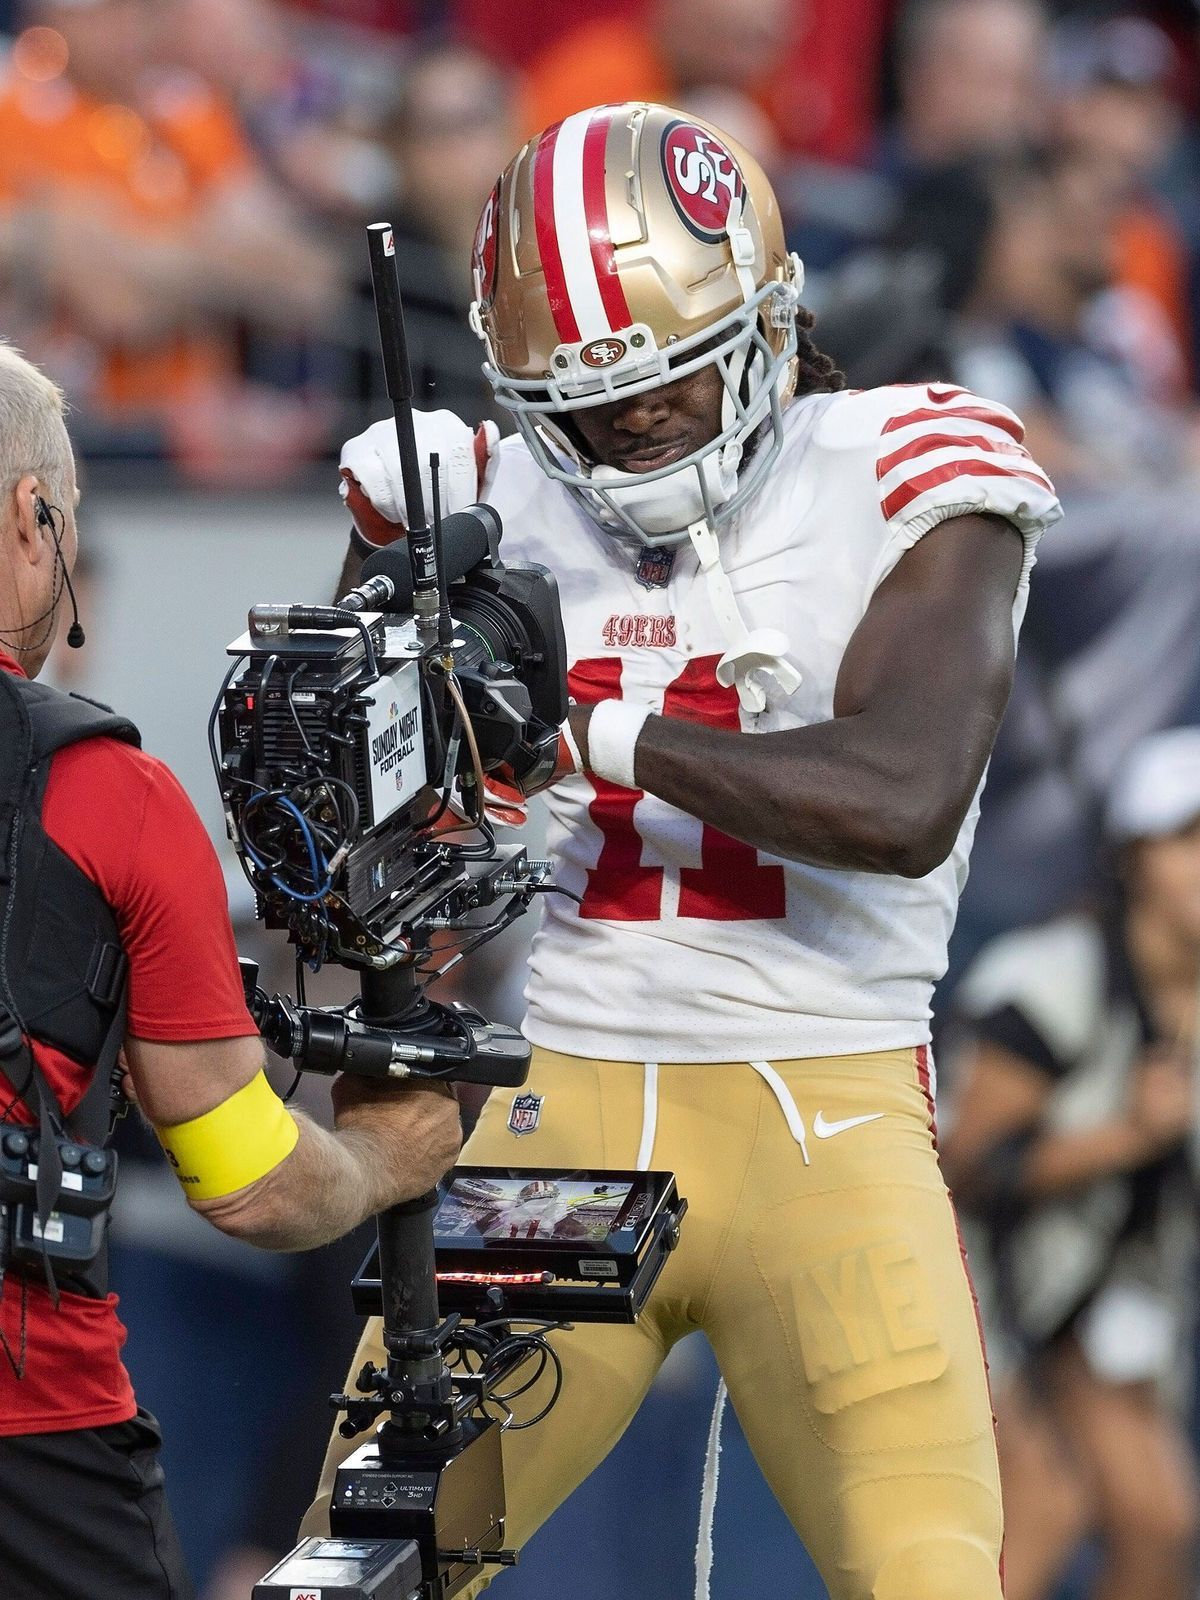 September 25, 2022, Denver, Colorado, USA: 49ers WR BRANDON AIYUK hams it up for the television camera after catching a TD Pass during the 1st. Half at Empower Field at Mile High Sunday evening. Th...